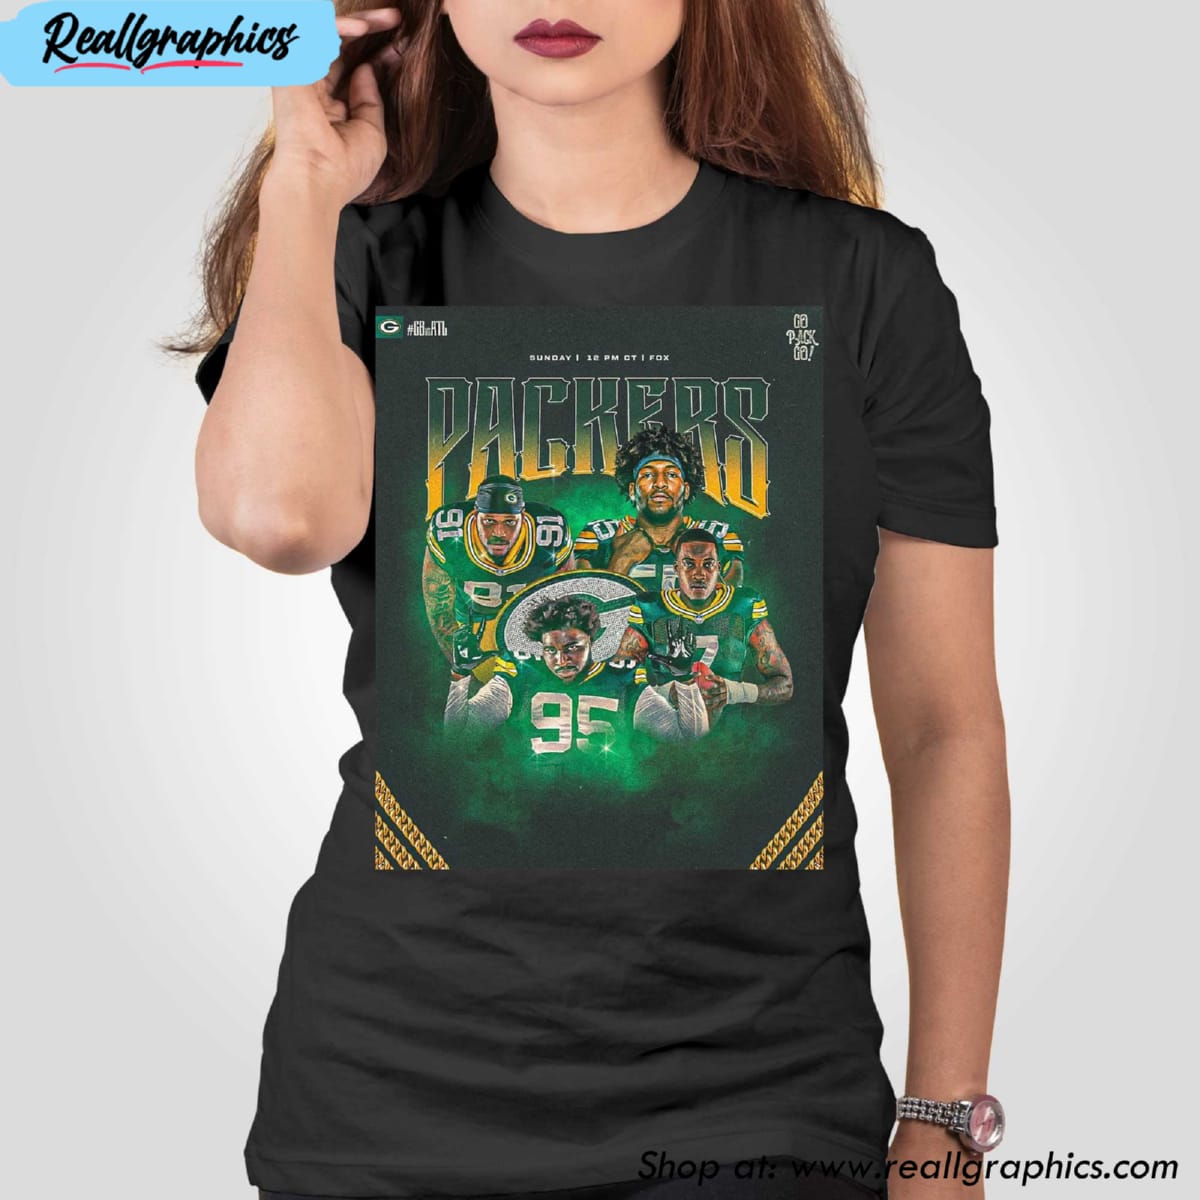 packers shirts